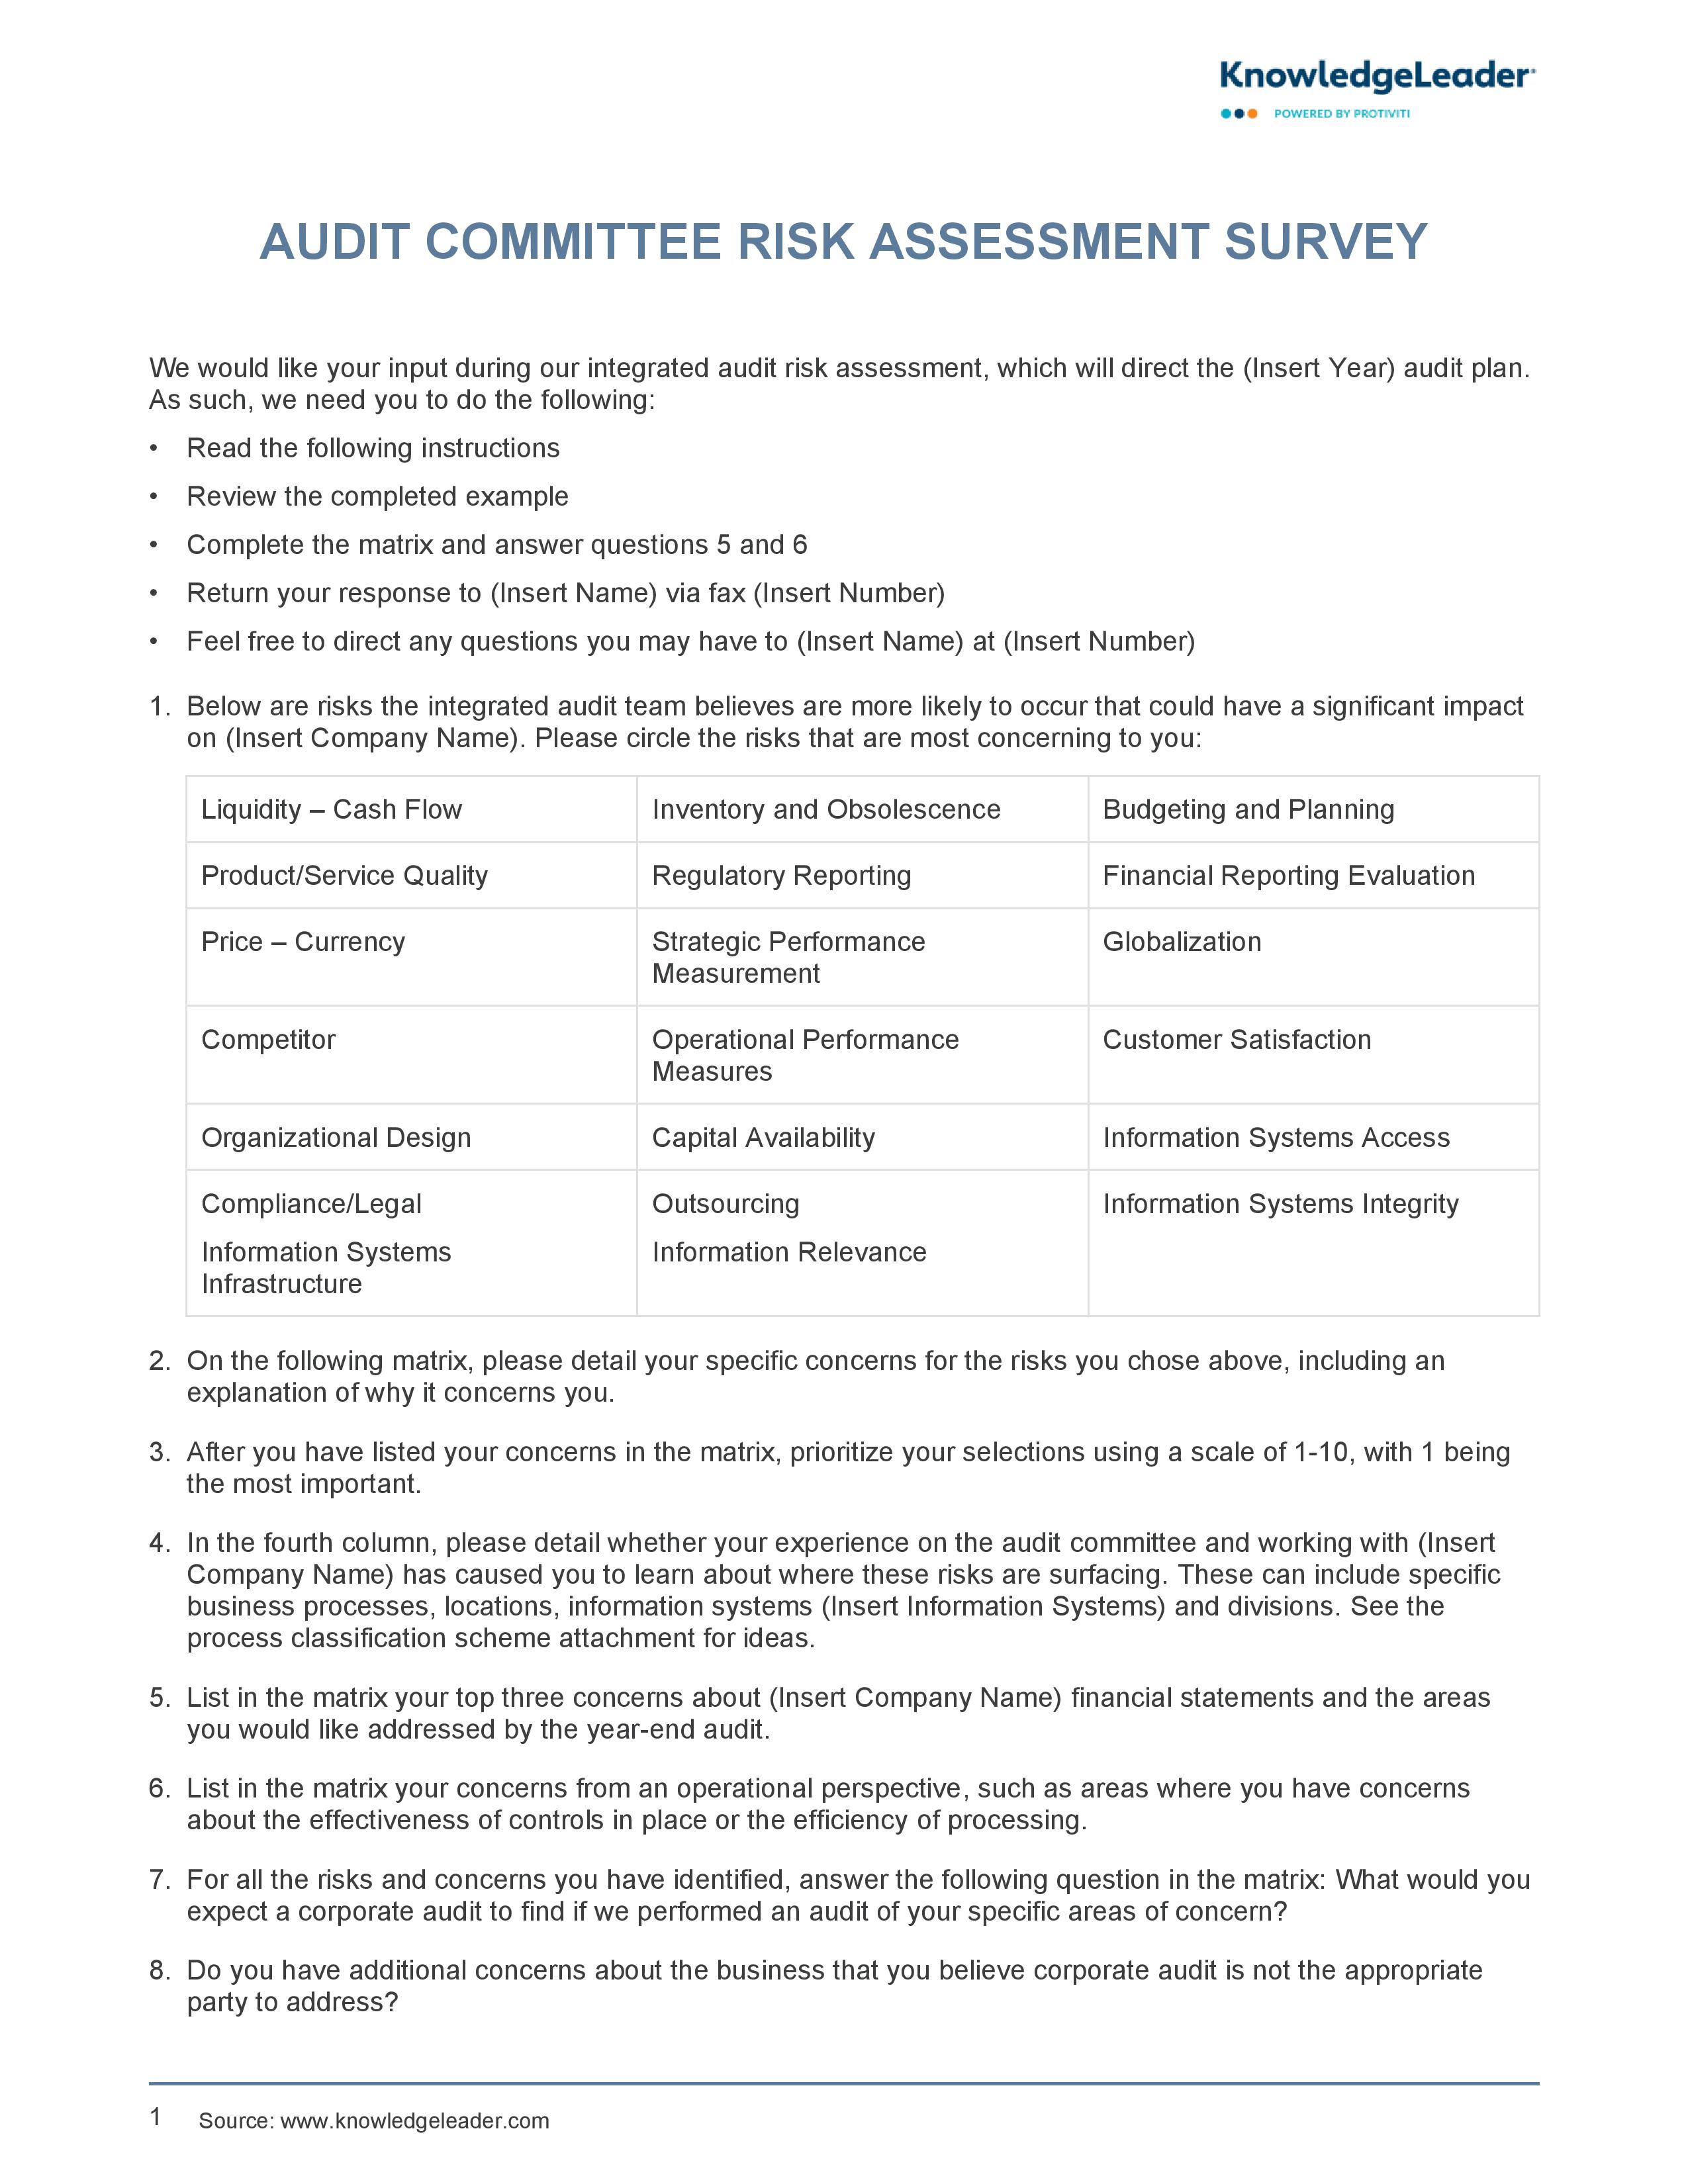 screenshot of the first page of Audit Committee Risk Assessment Survey Questionnaire